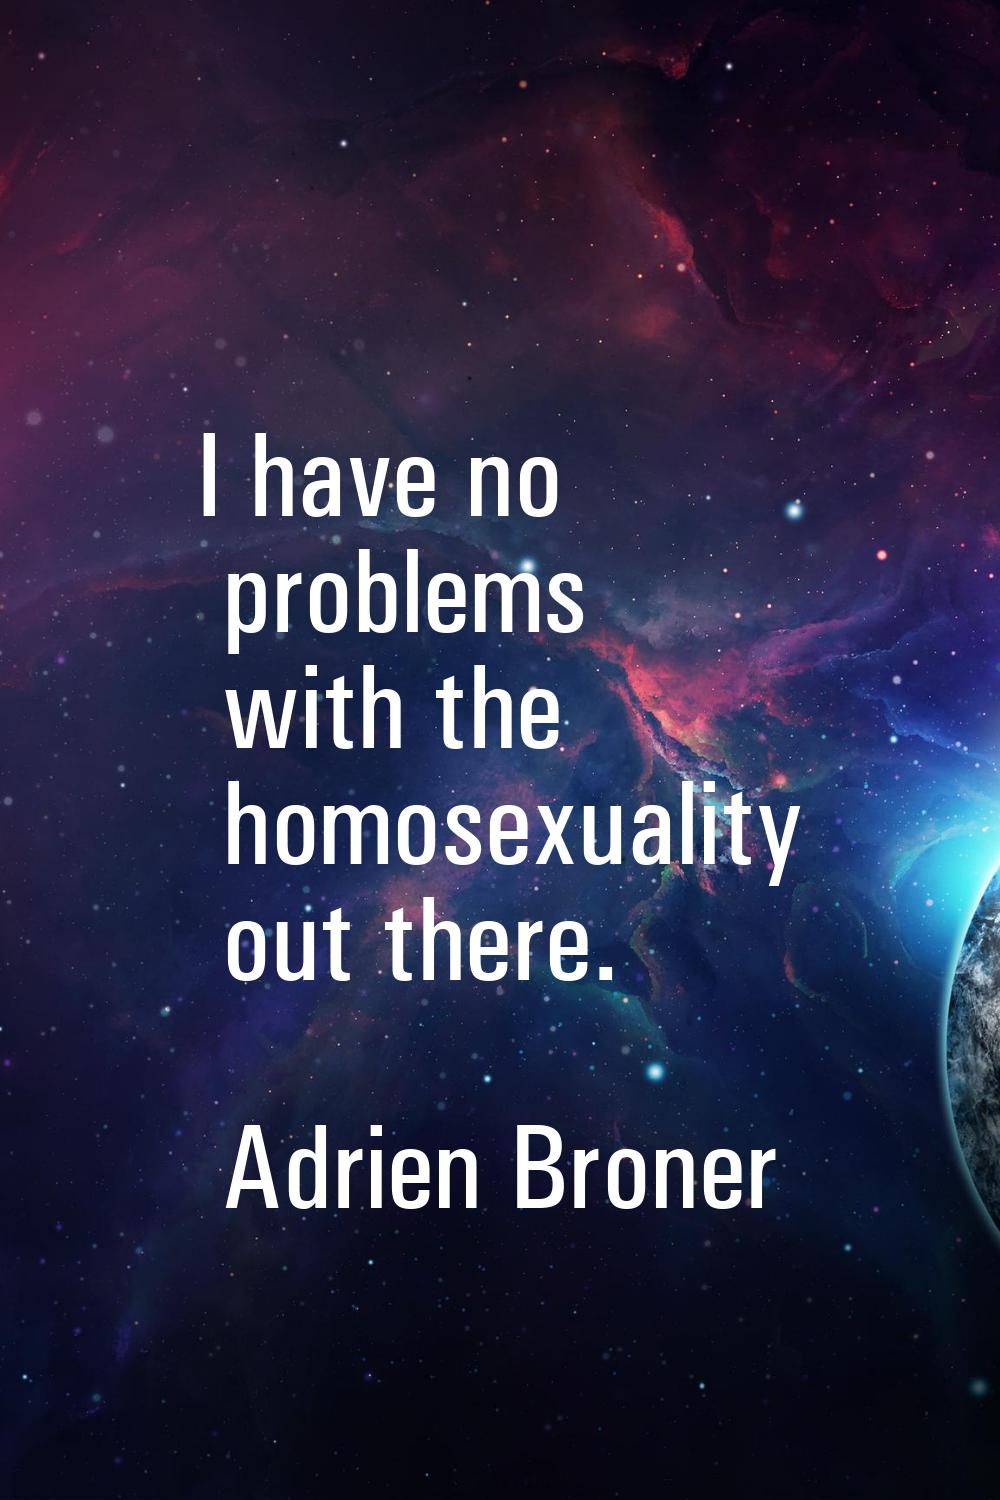 I have no problems with the homosexuality out there.